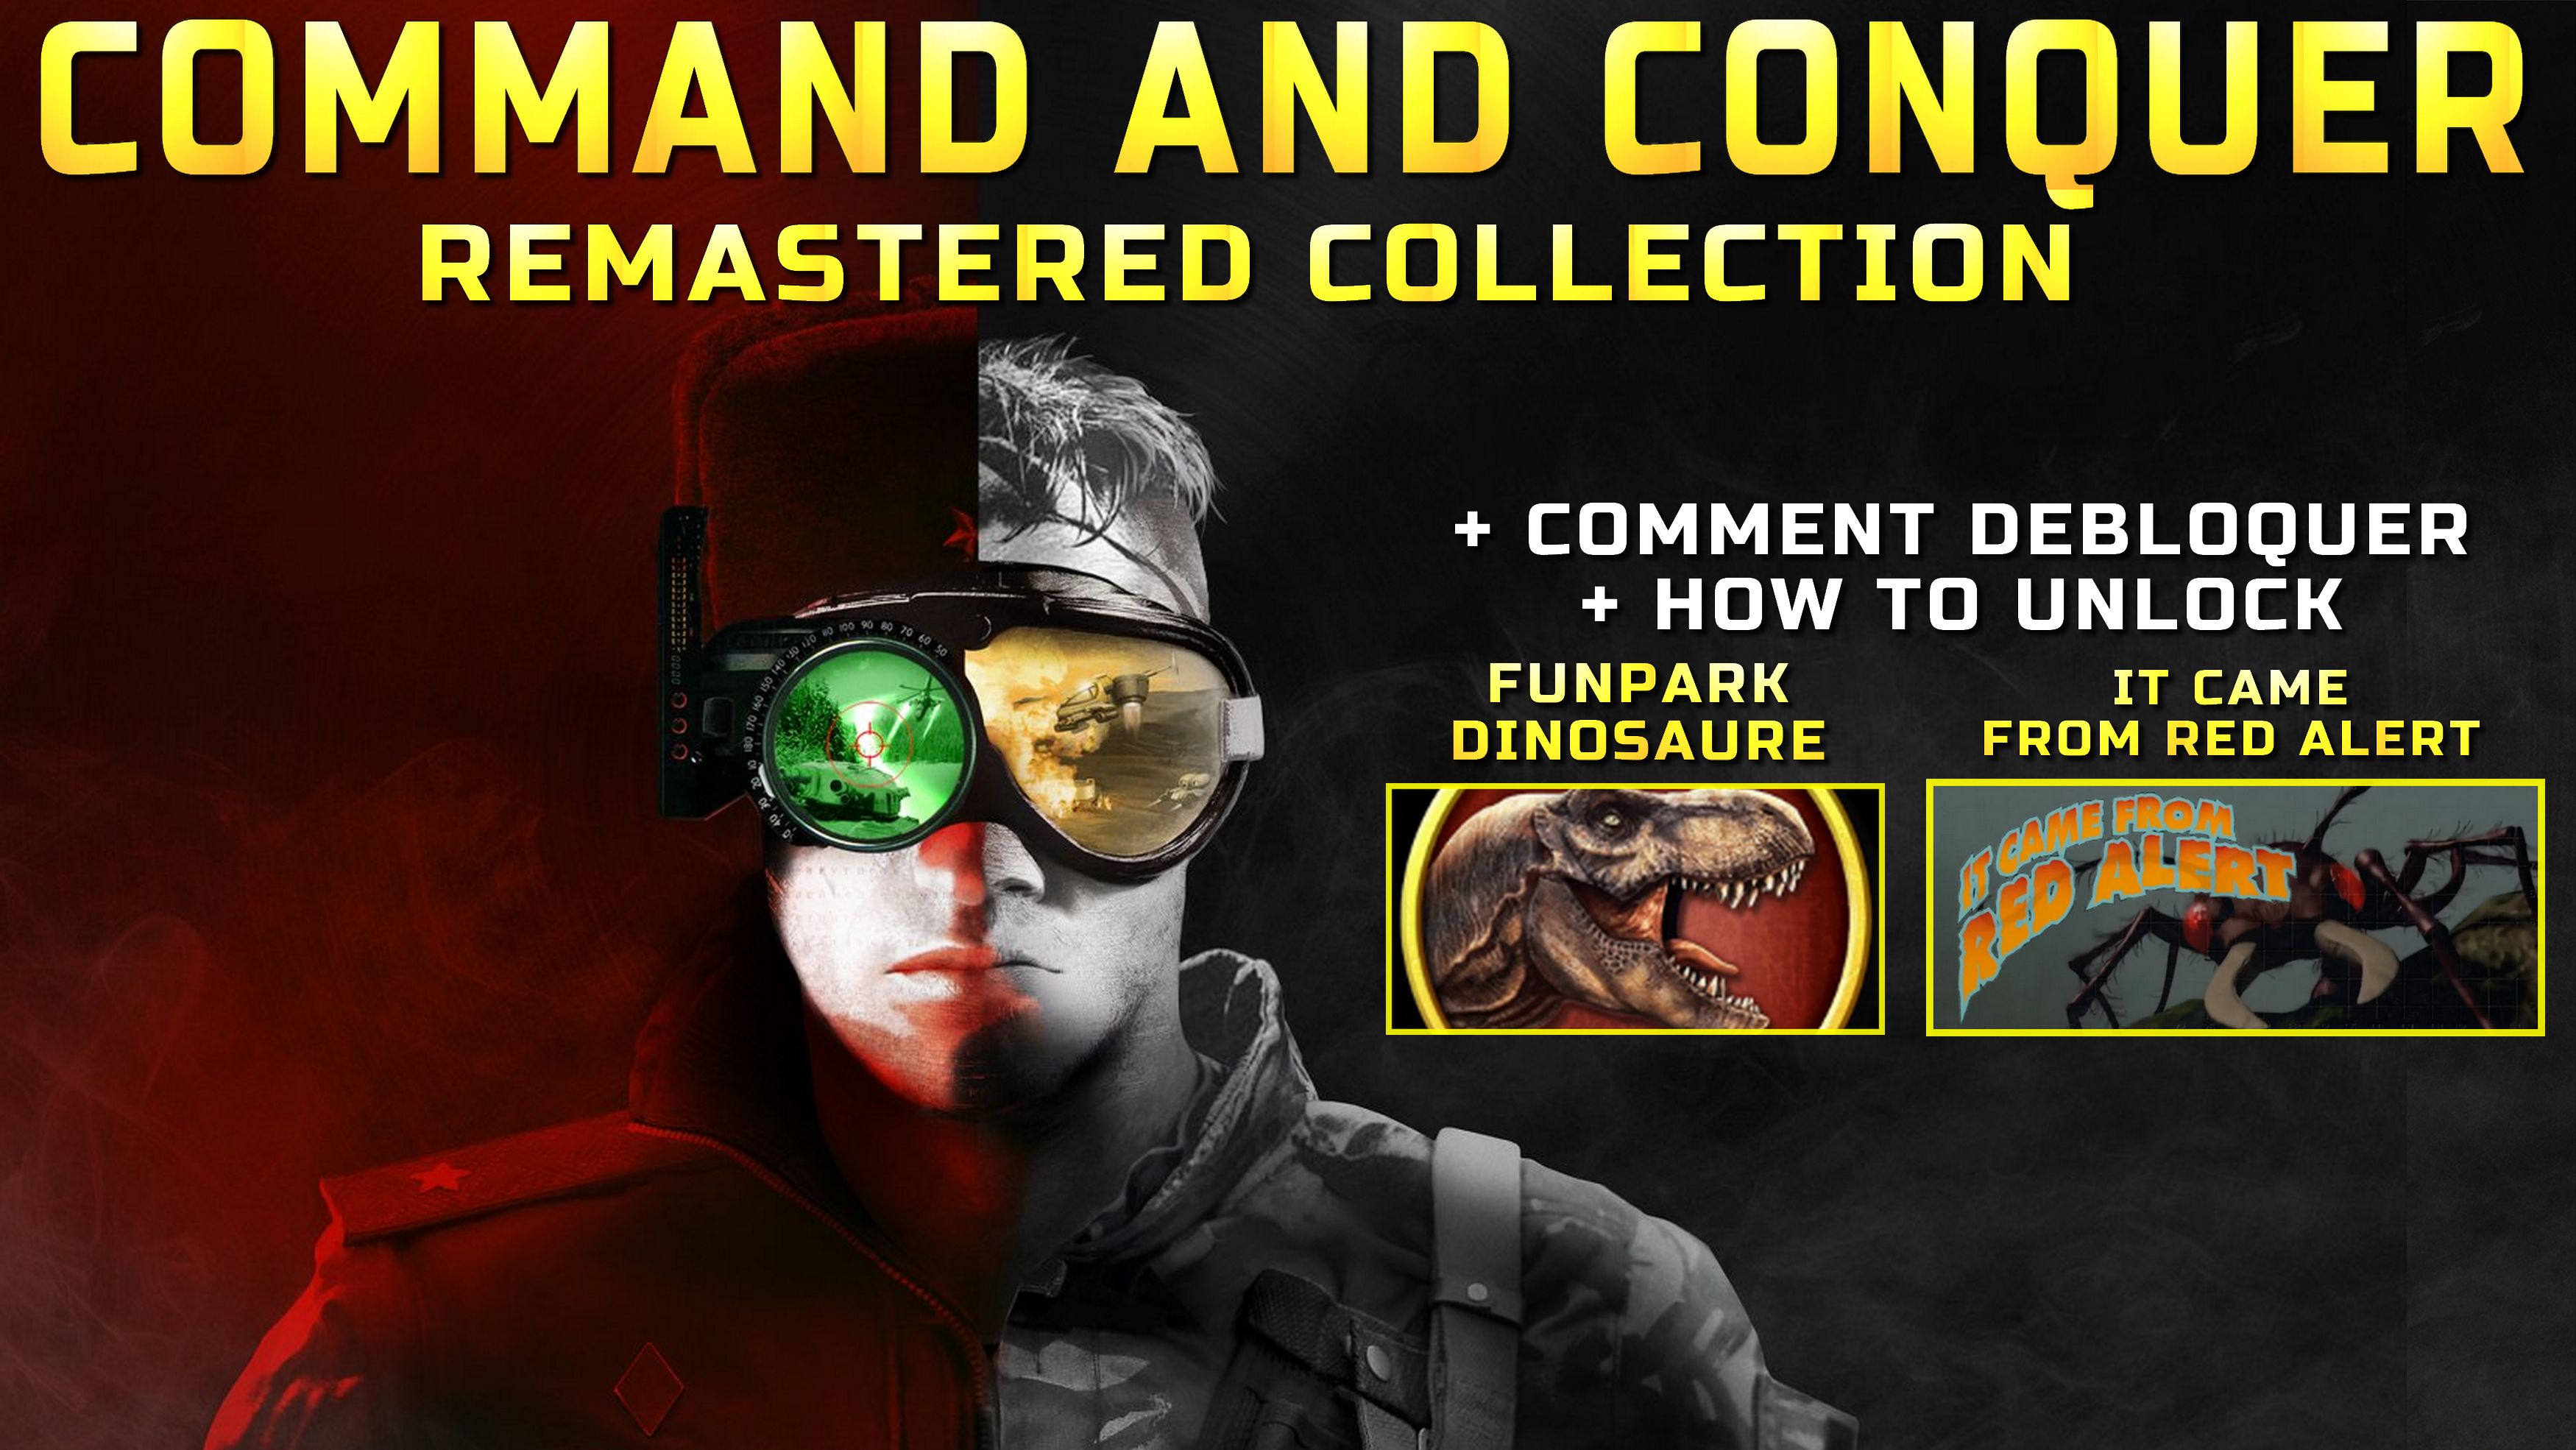 Give me a command and. Command & Conquer Remastered collection. Читы на Command and Conquer Remastered collection. Command & Conquer™ the Ultimate collection. Command & Conquer Remastered collection Origin achiev.